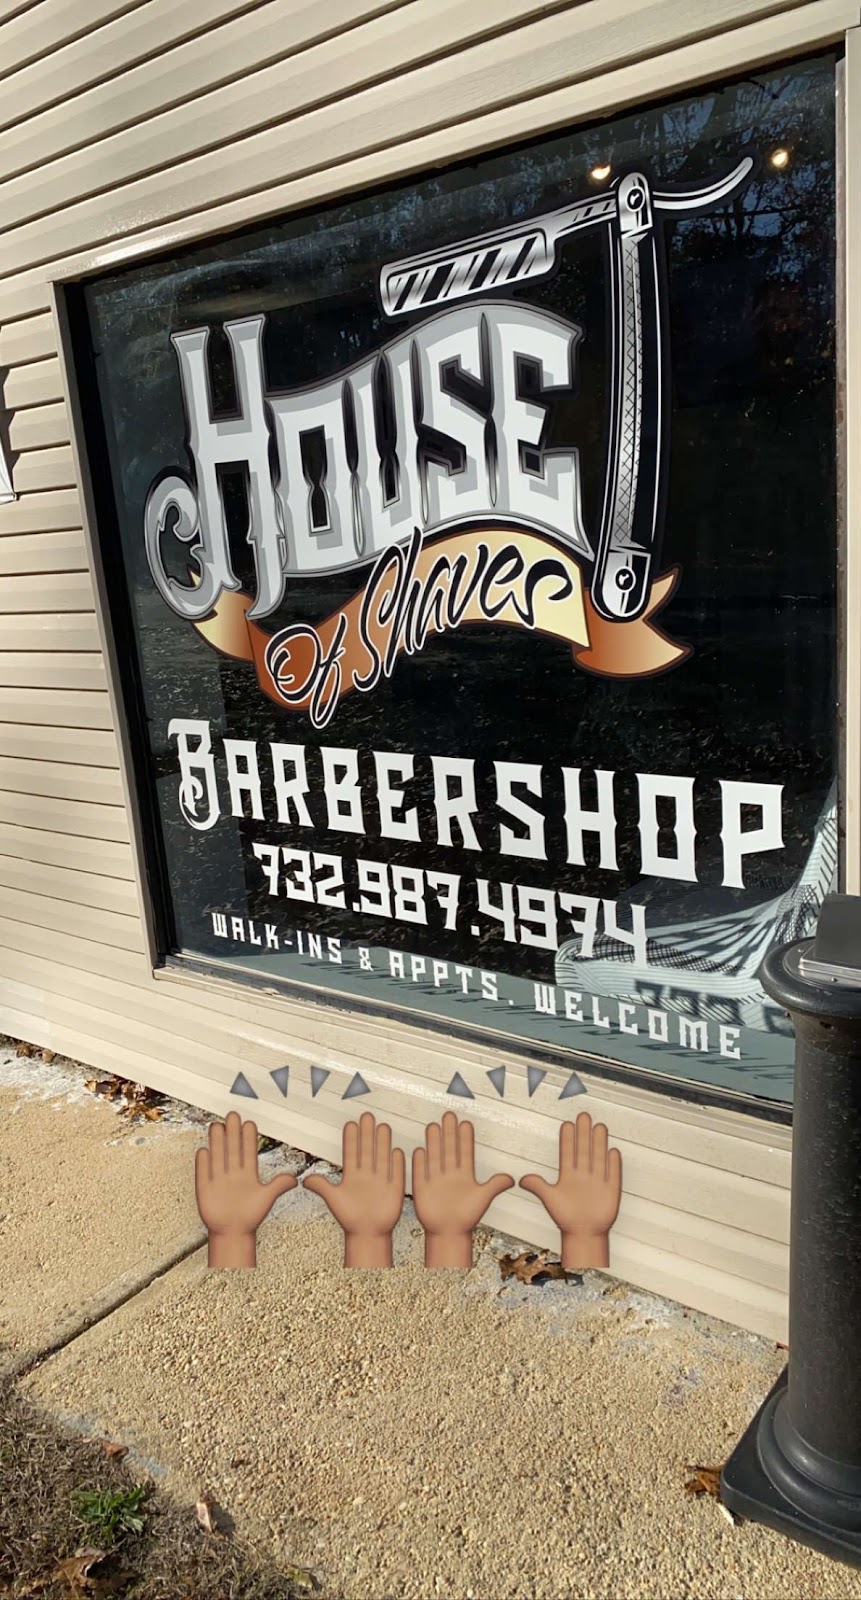 House Of Shaves | 290 Cassville Rd, Jackson Township, NJ 08527 | Phone: (732) 987-4974